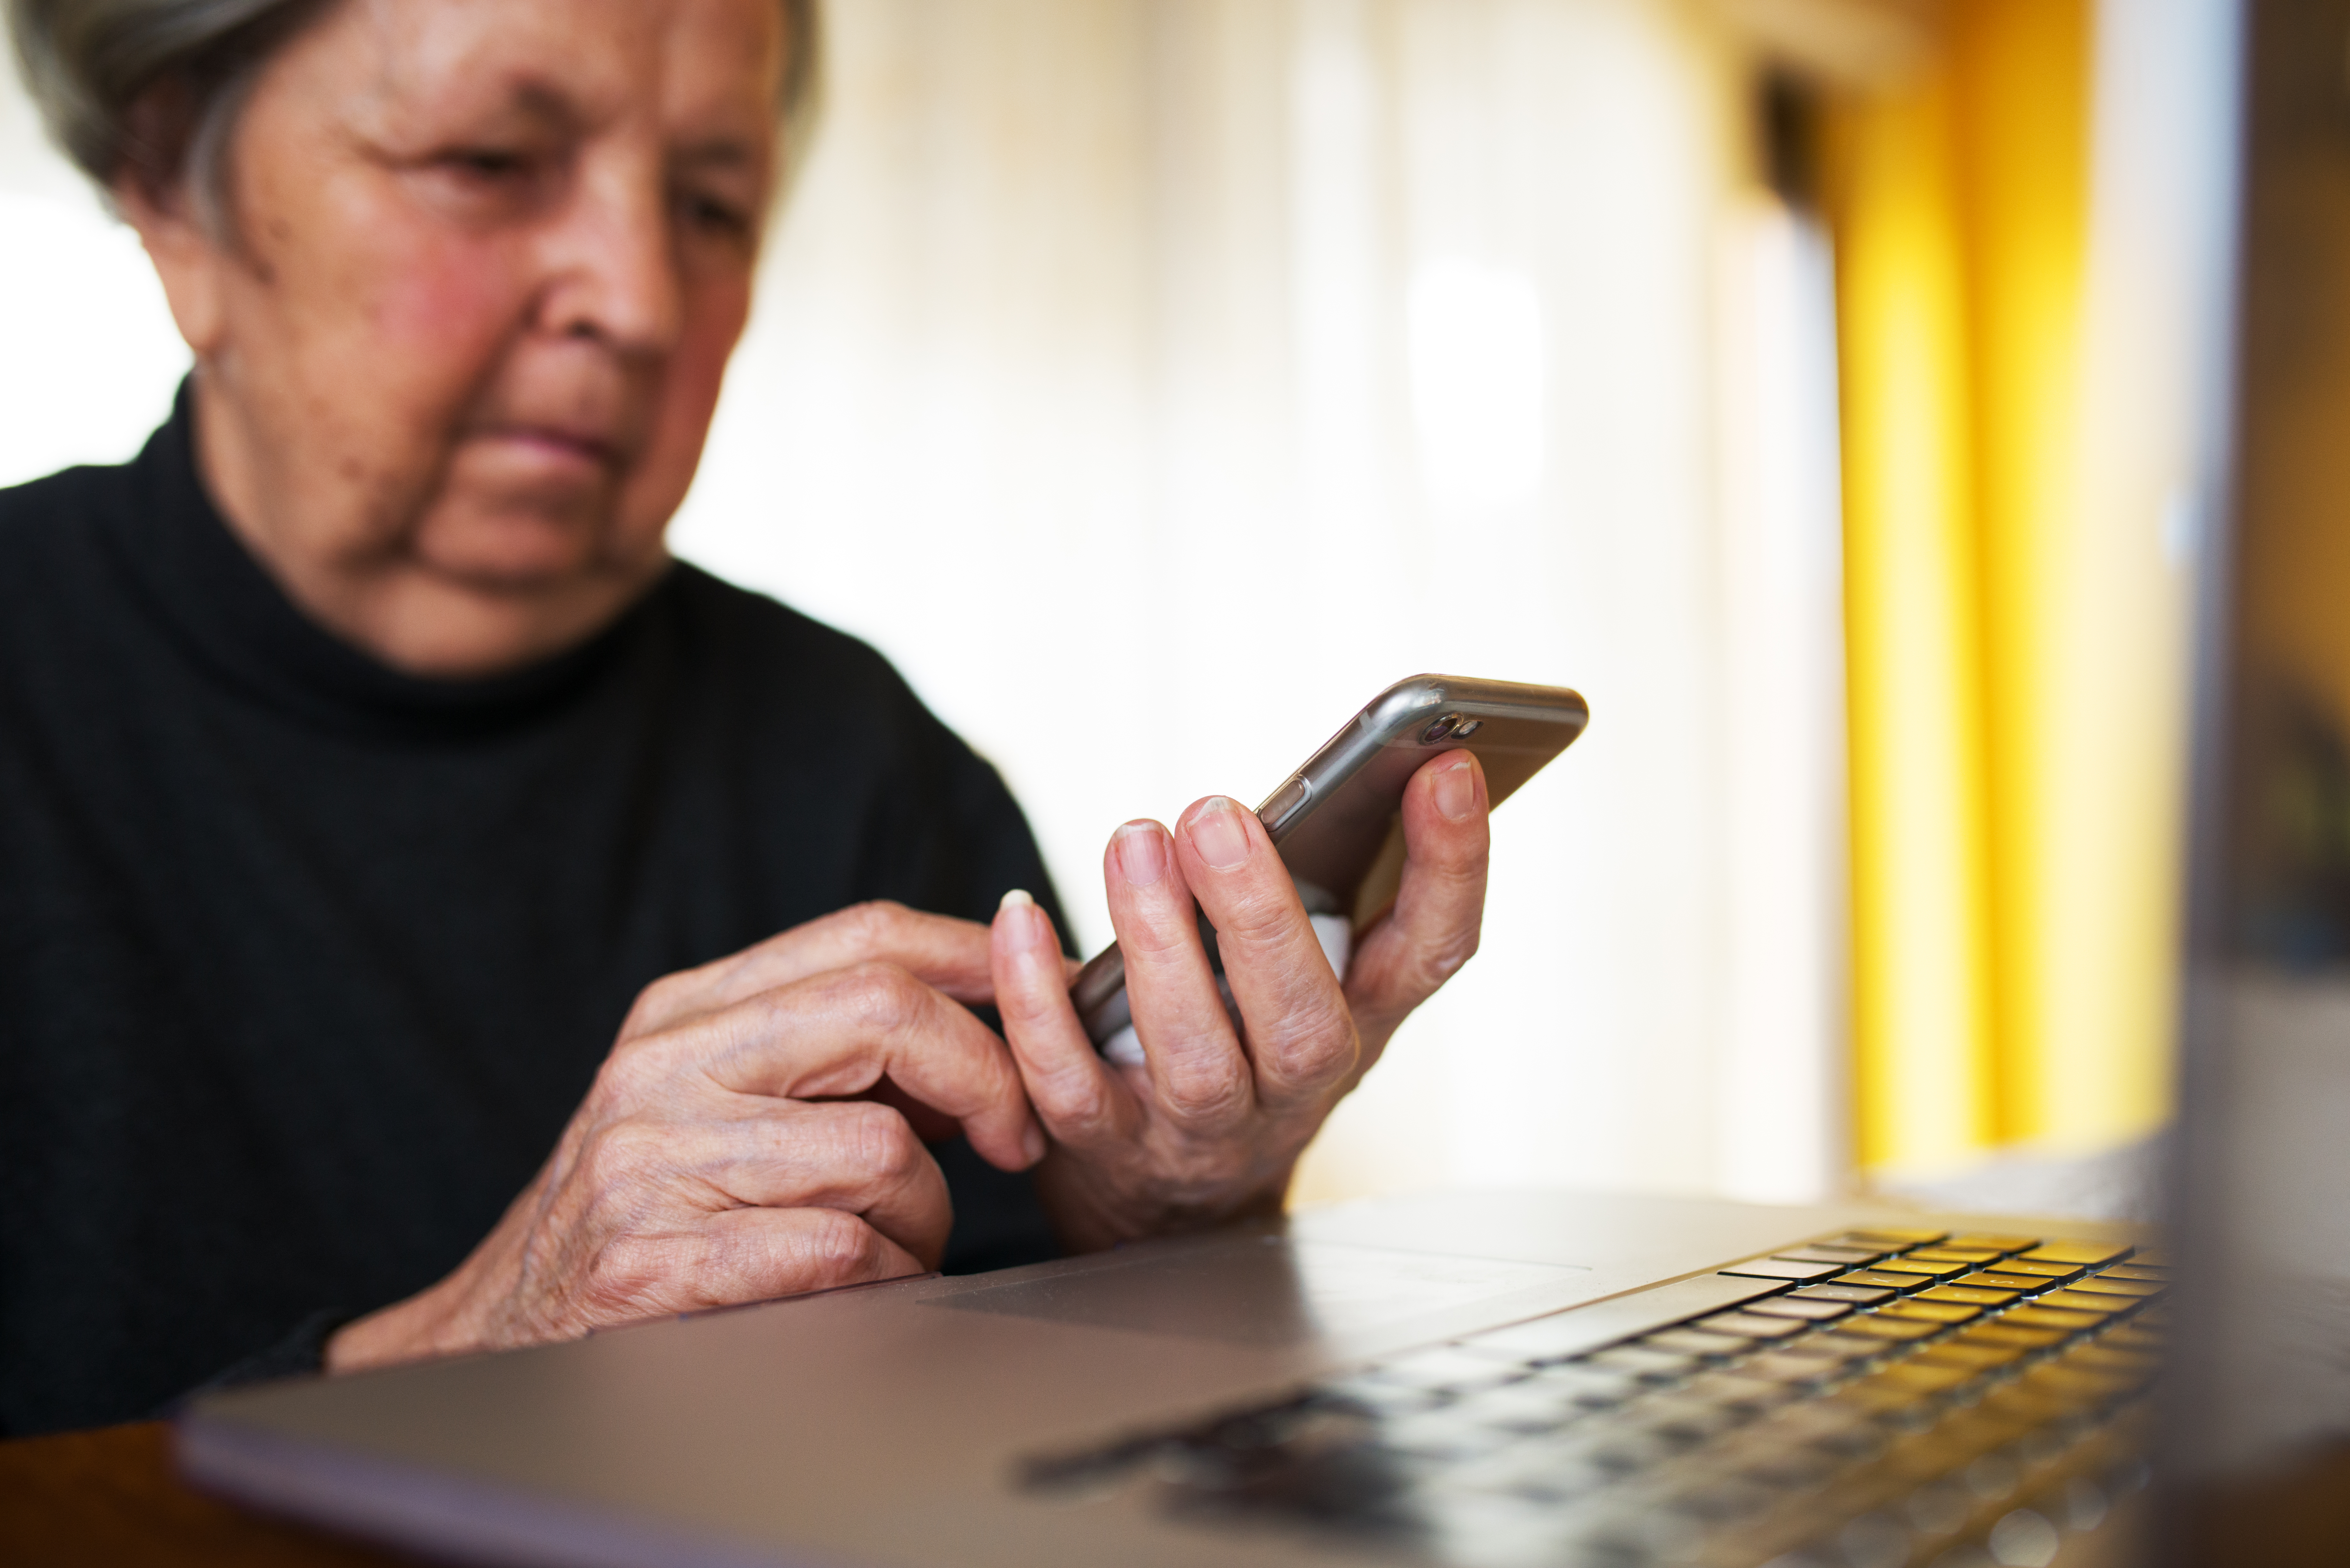 A senior woman using a smartphone and laptop at home | Source: Shutterstock